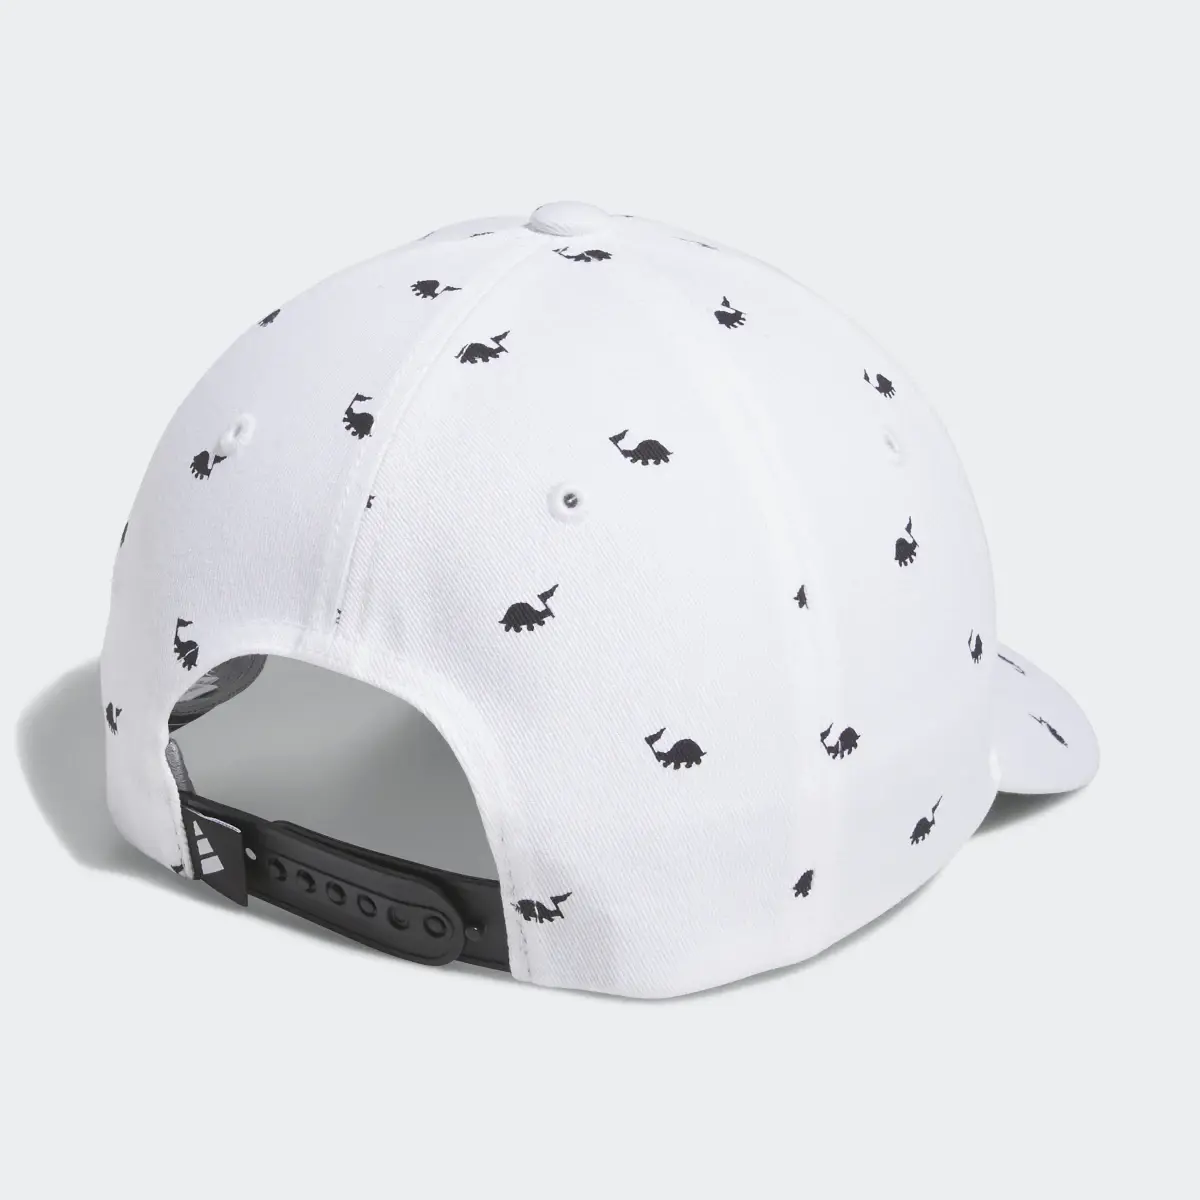 Adidas Casquette No Slow Play. 3